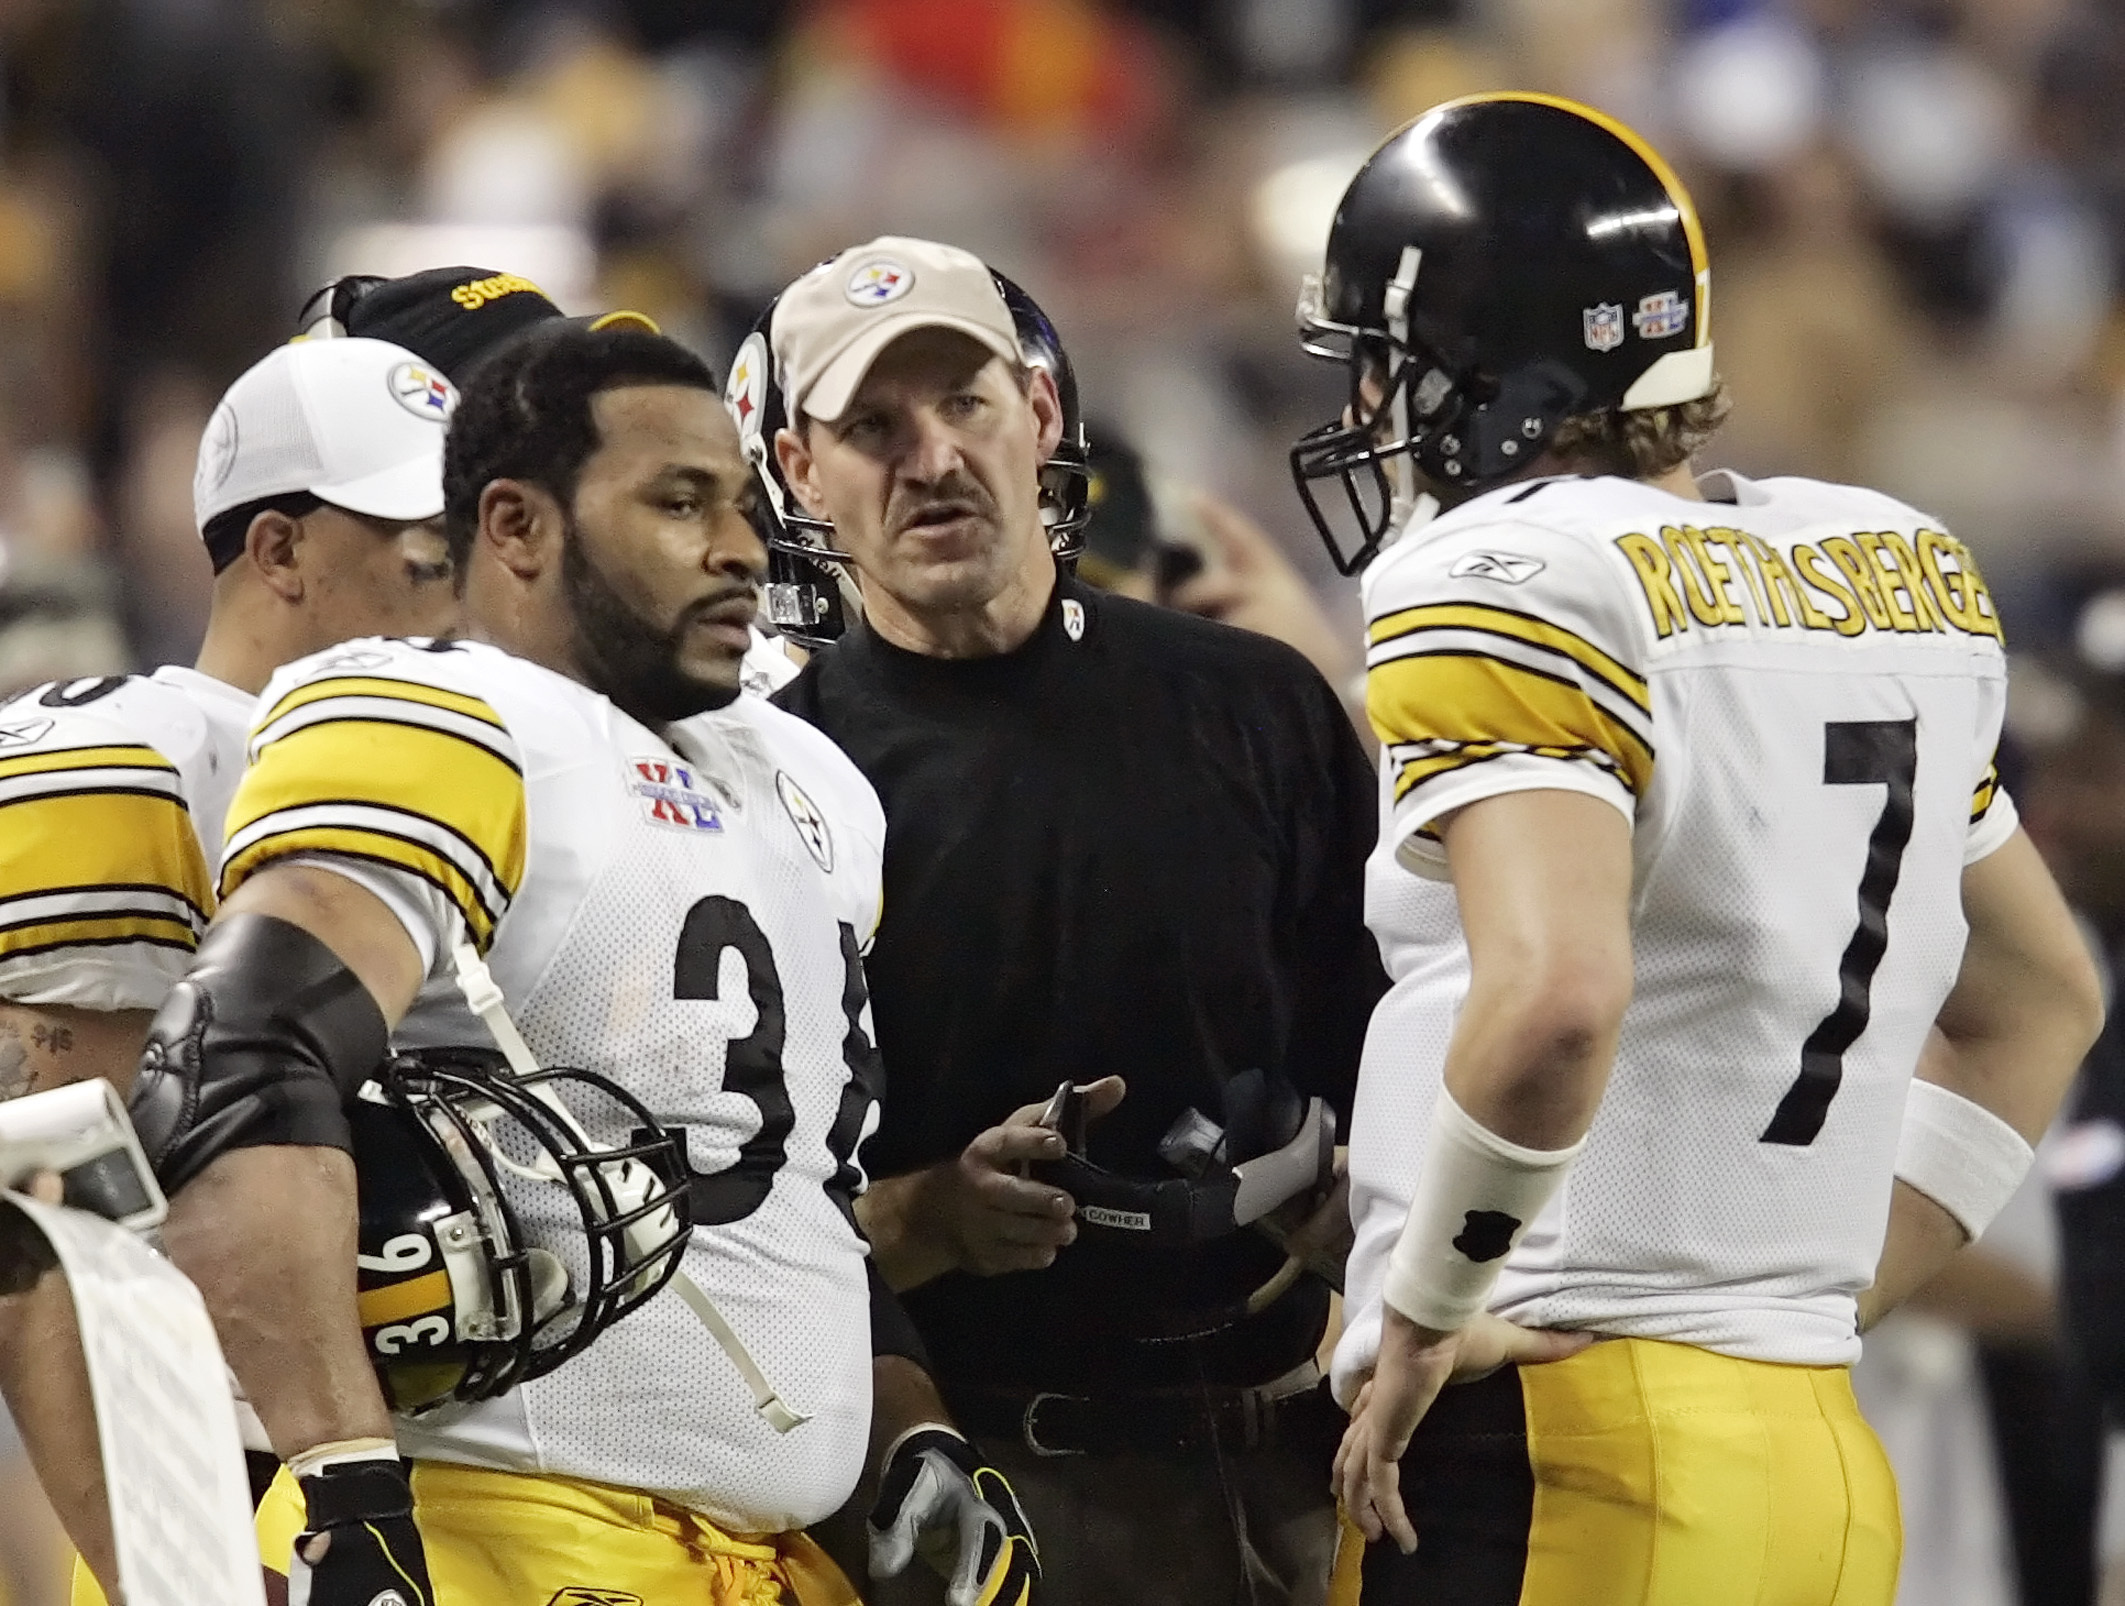 Bill Cowher defends Bill Belichick, Patriots for Spygate, says it